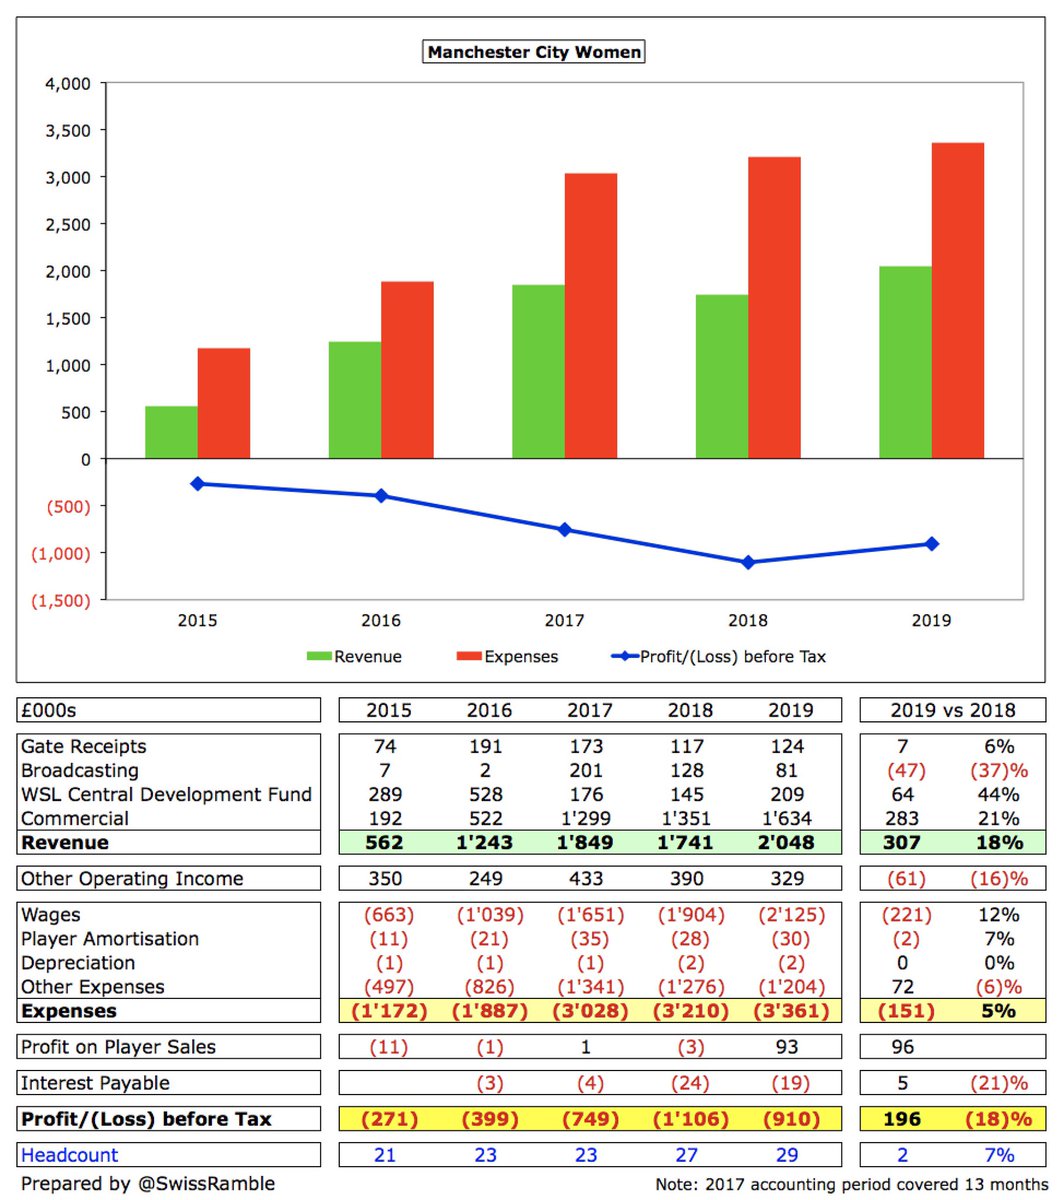 Manchester City loss narrowed from £1.1m to £910k in 2019, as £307k revenue growth to £2.0m outpaced £151m expenses increase to £3.4m. Around 80% of City’s revenue comes from commercial, which has shot up from £192k in 2015 to £1.6m in 2019.